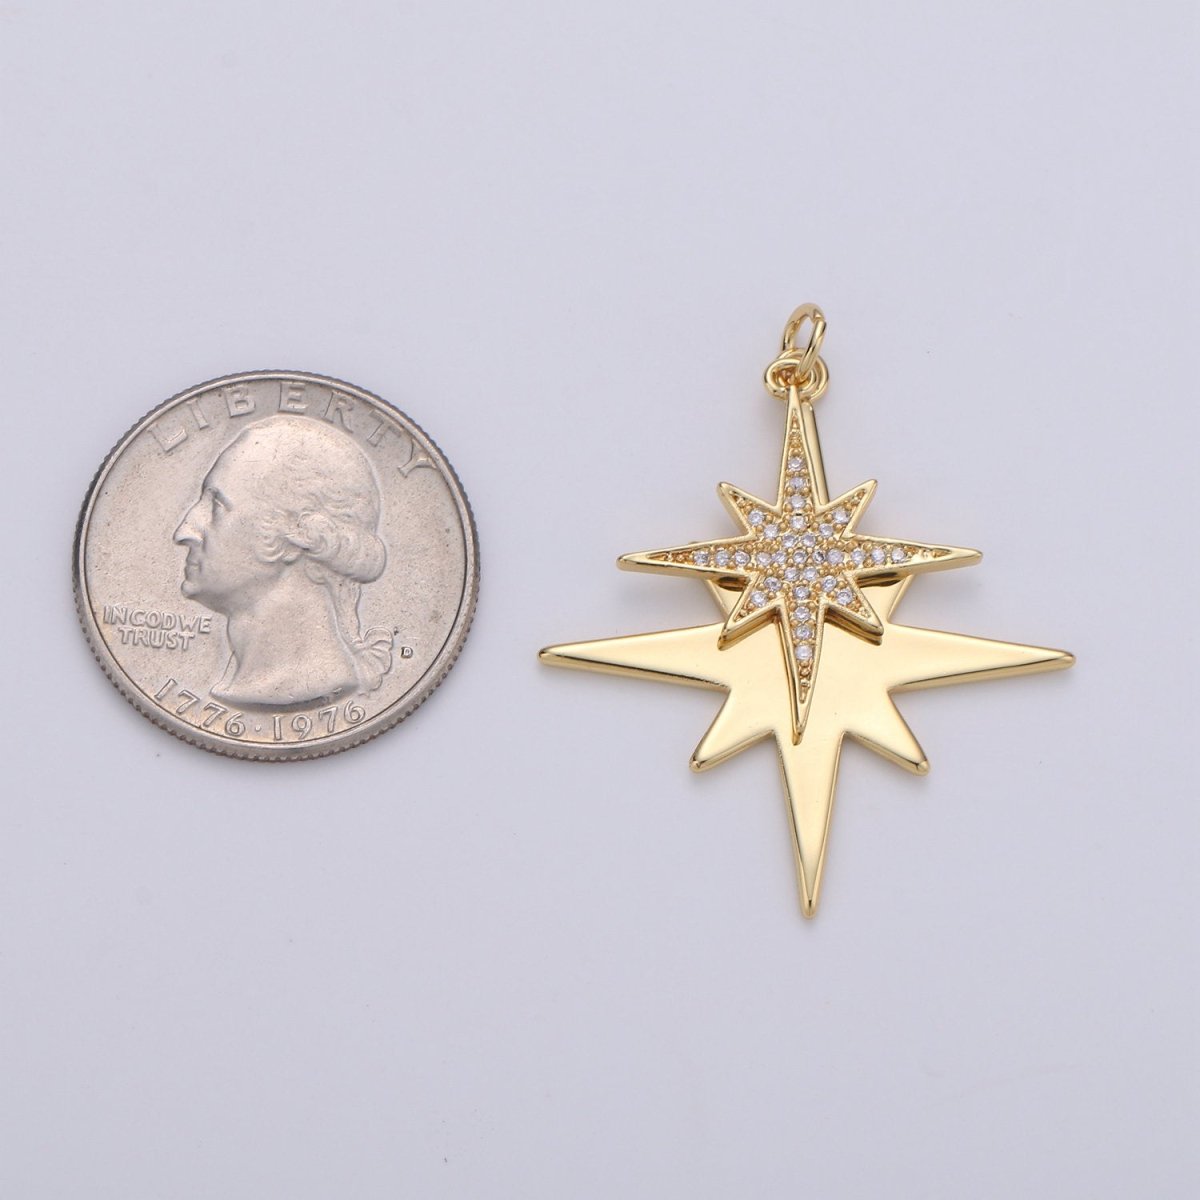 40x35m 24k Gold Filled North Star Charms, Gold Star Pendant, Celestial Jewelry Minimalist Jewelry Making supply Micro Pave Dual Star Charm D-495 - DLUXCA